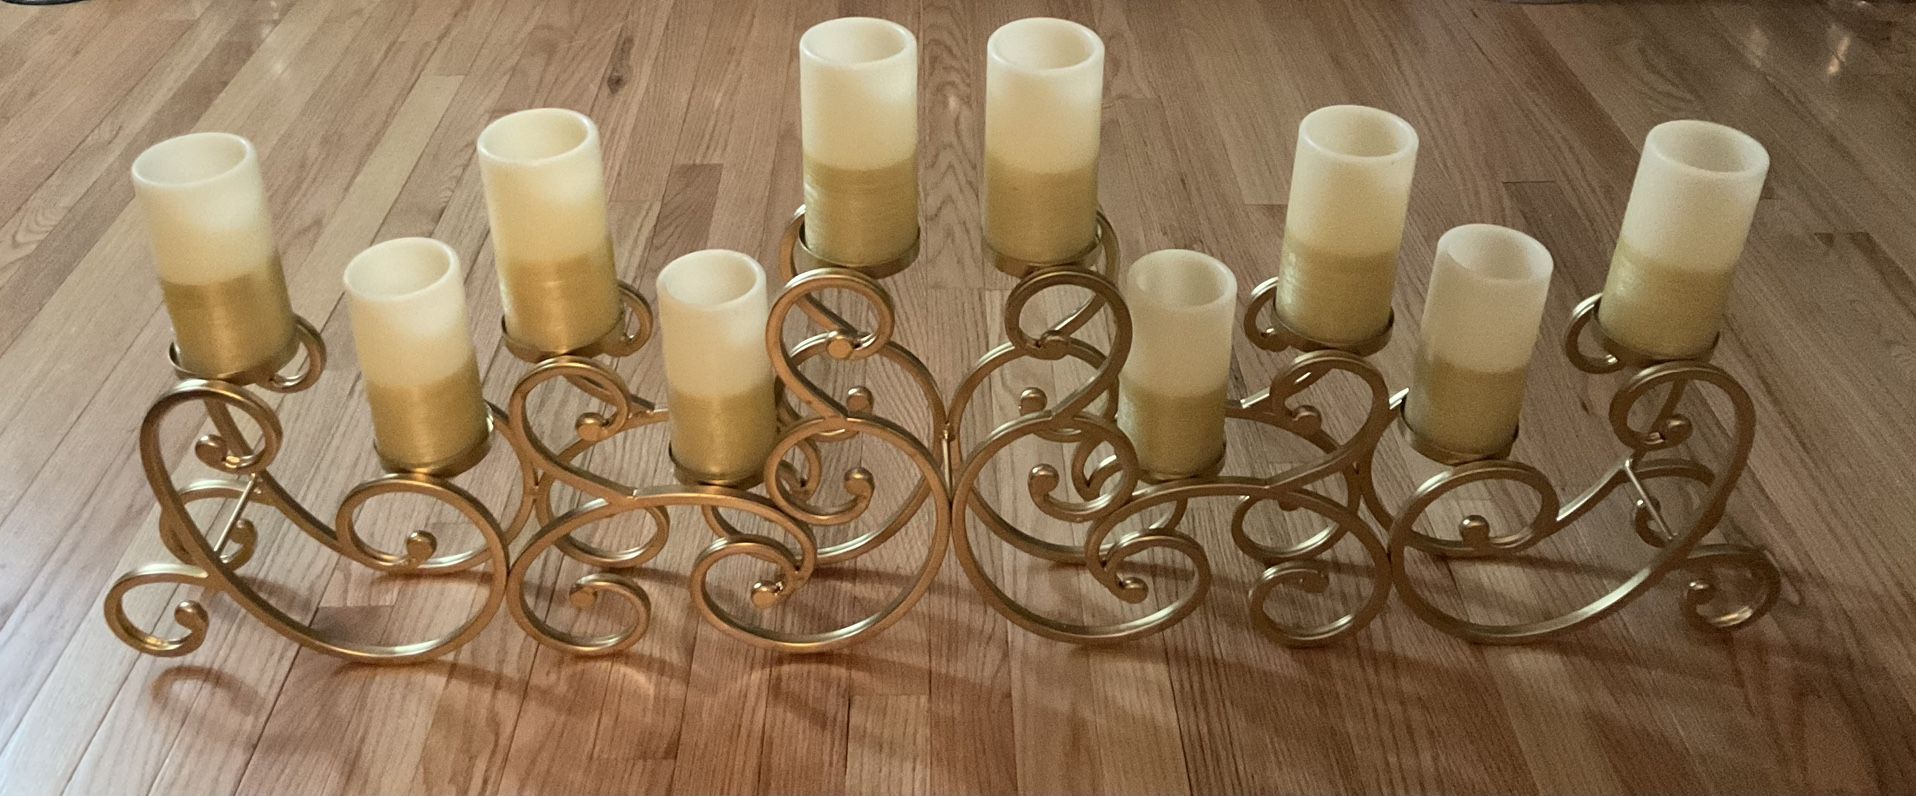 Nice Candle Holder-46 Inches Long x 13  Inches Tall Not Including The Candle Tallness-$100 Firm